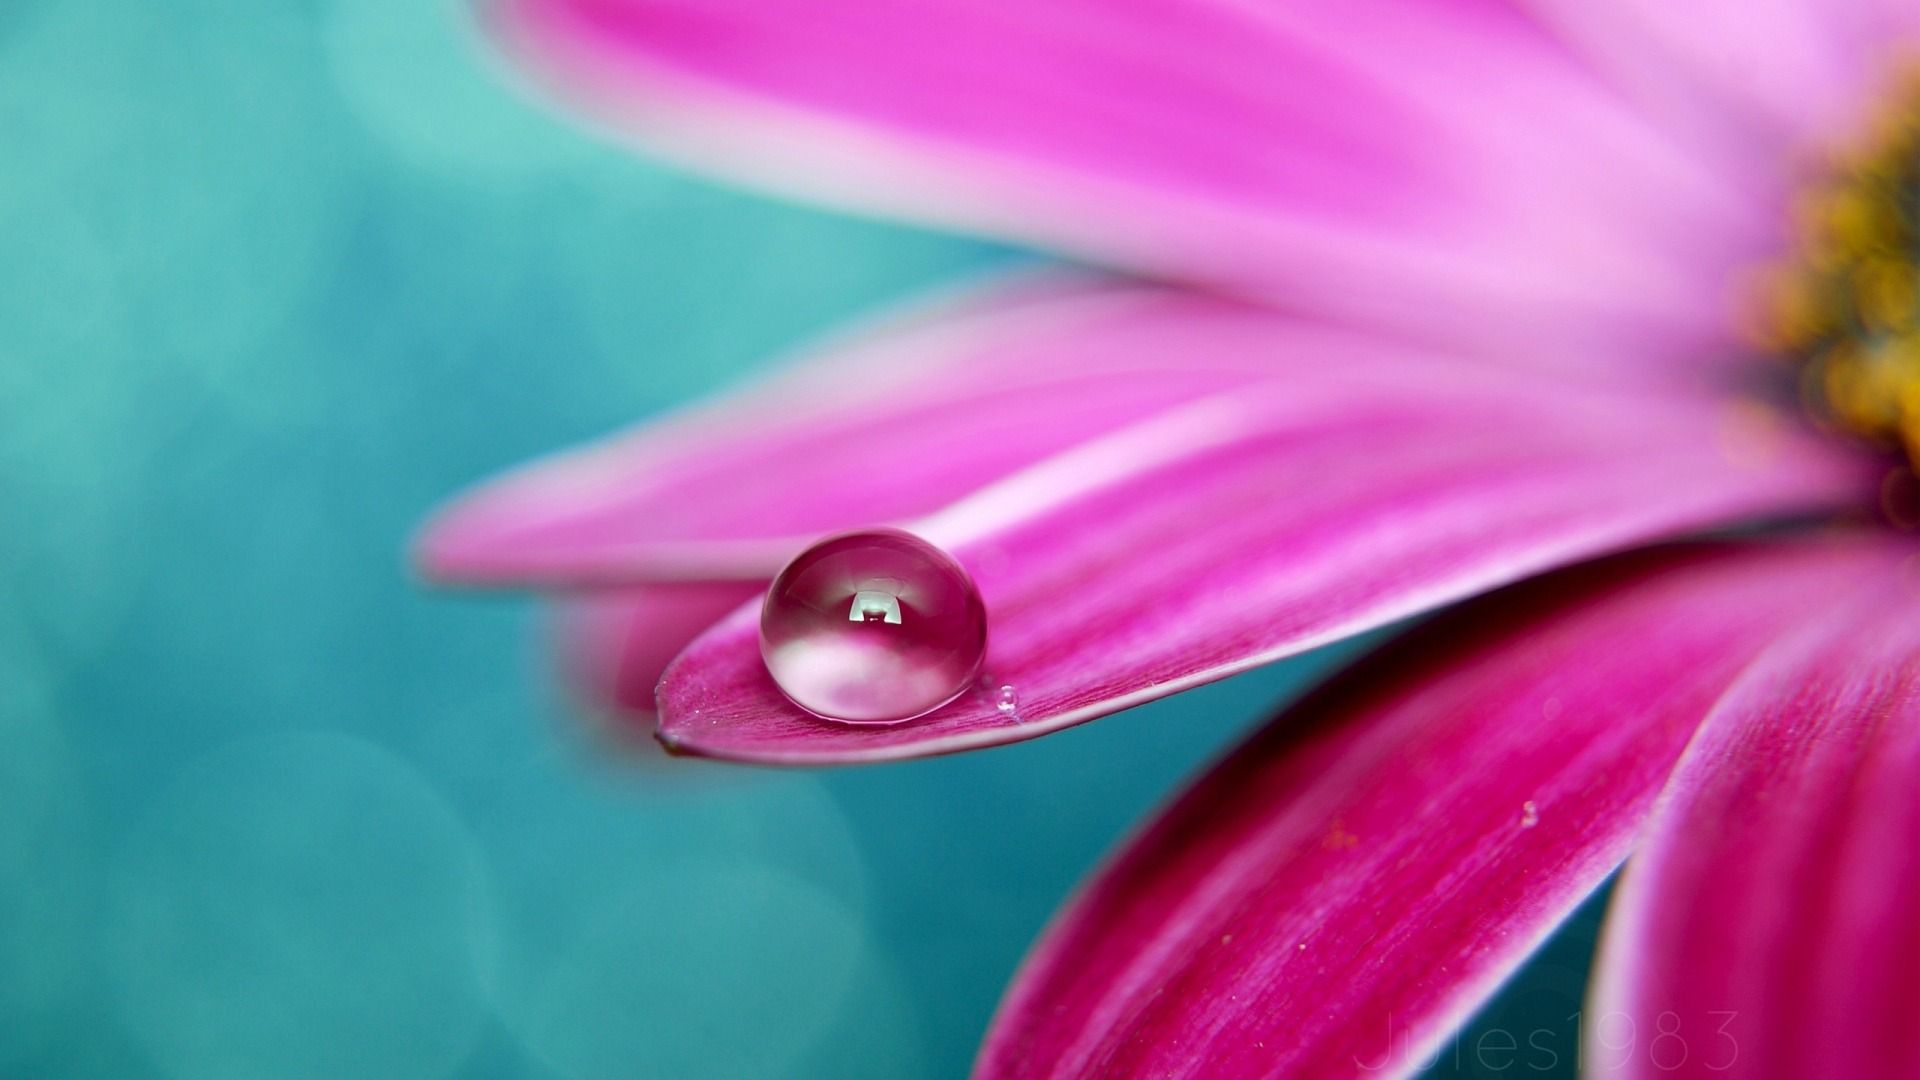 water drop photography | Water Drop on Petal-Flowers Photography ...